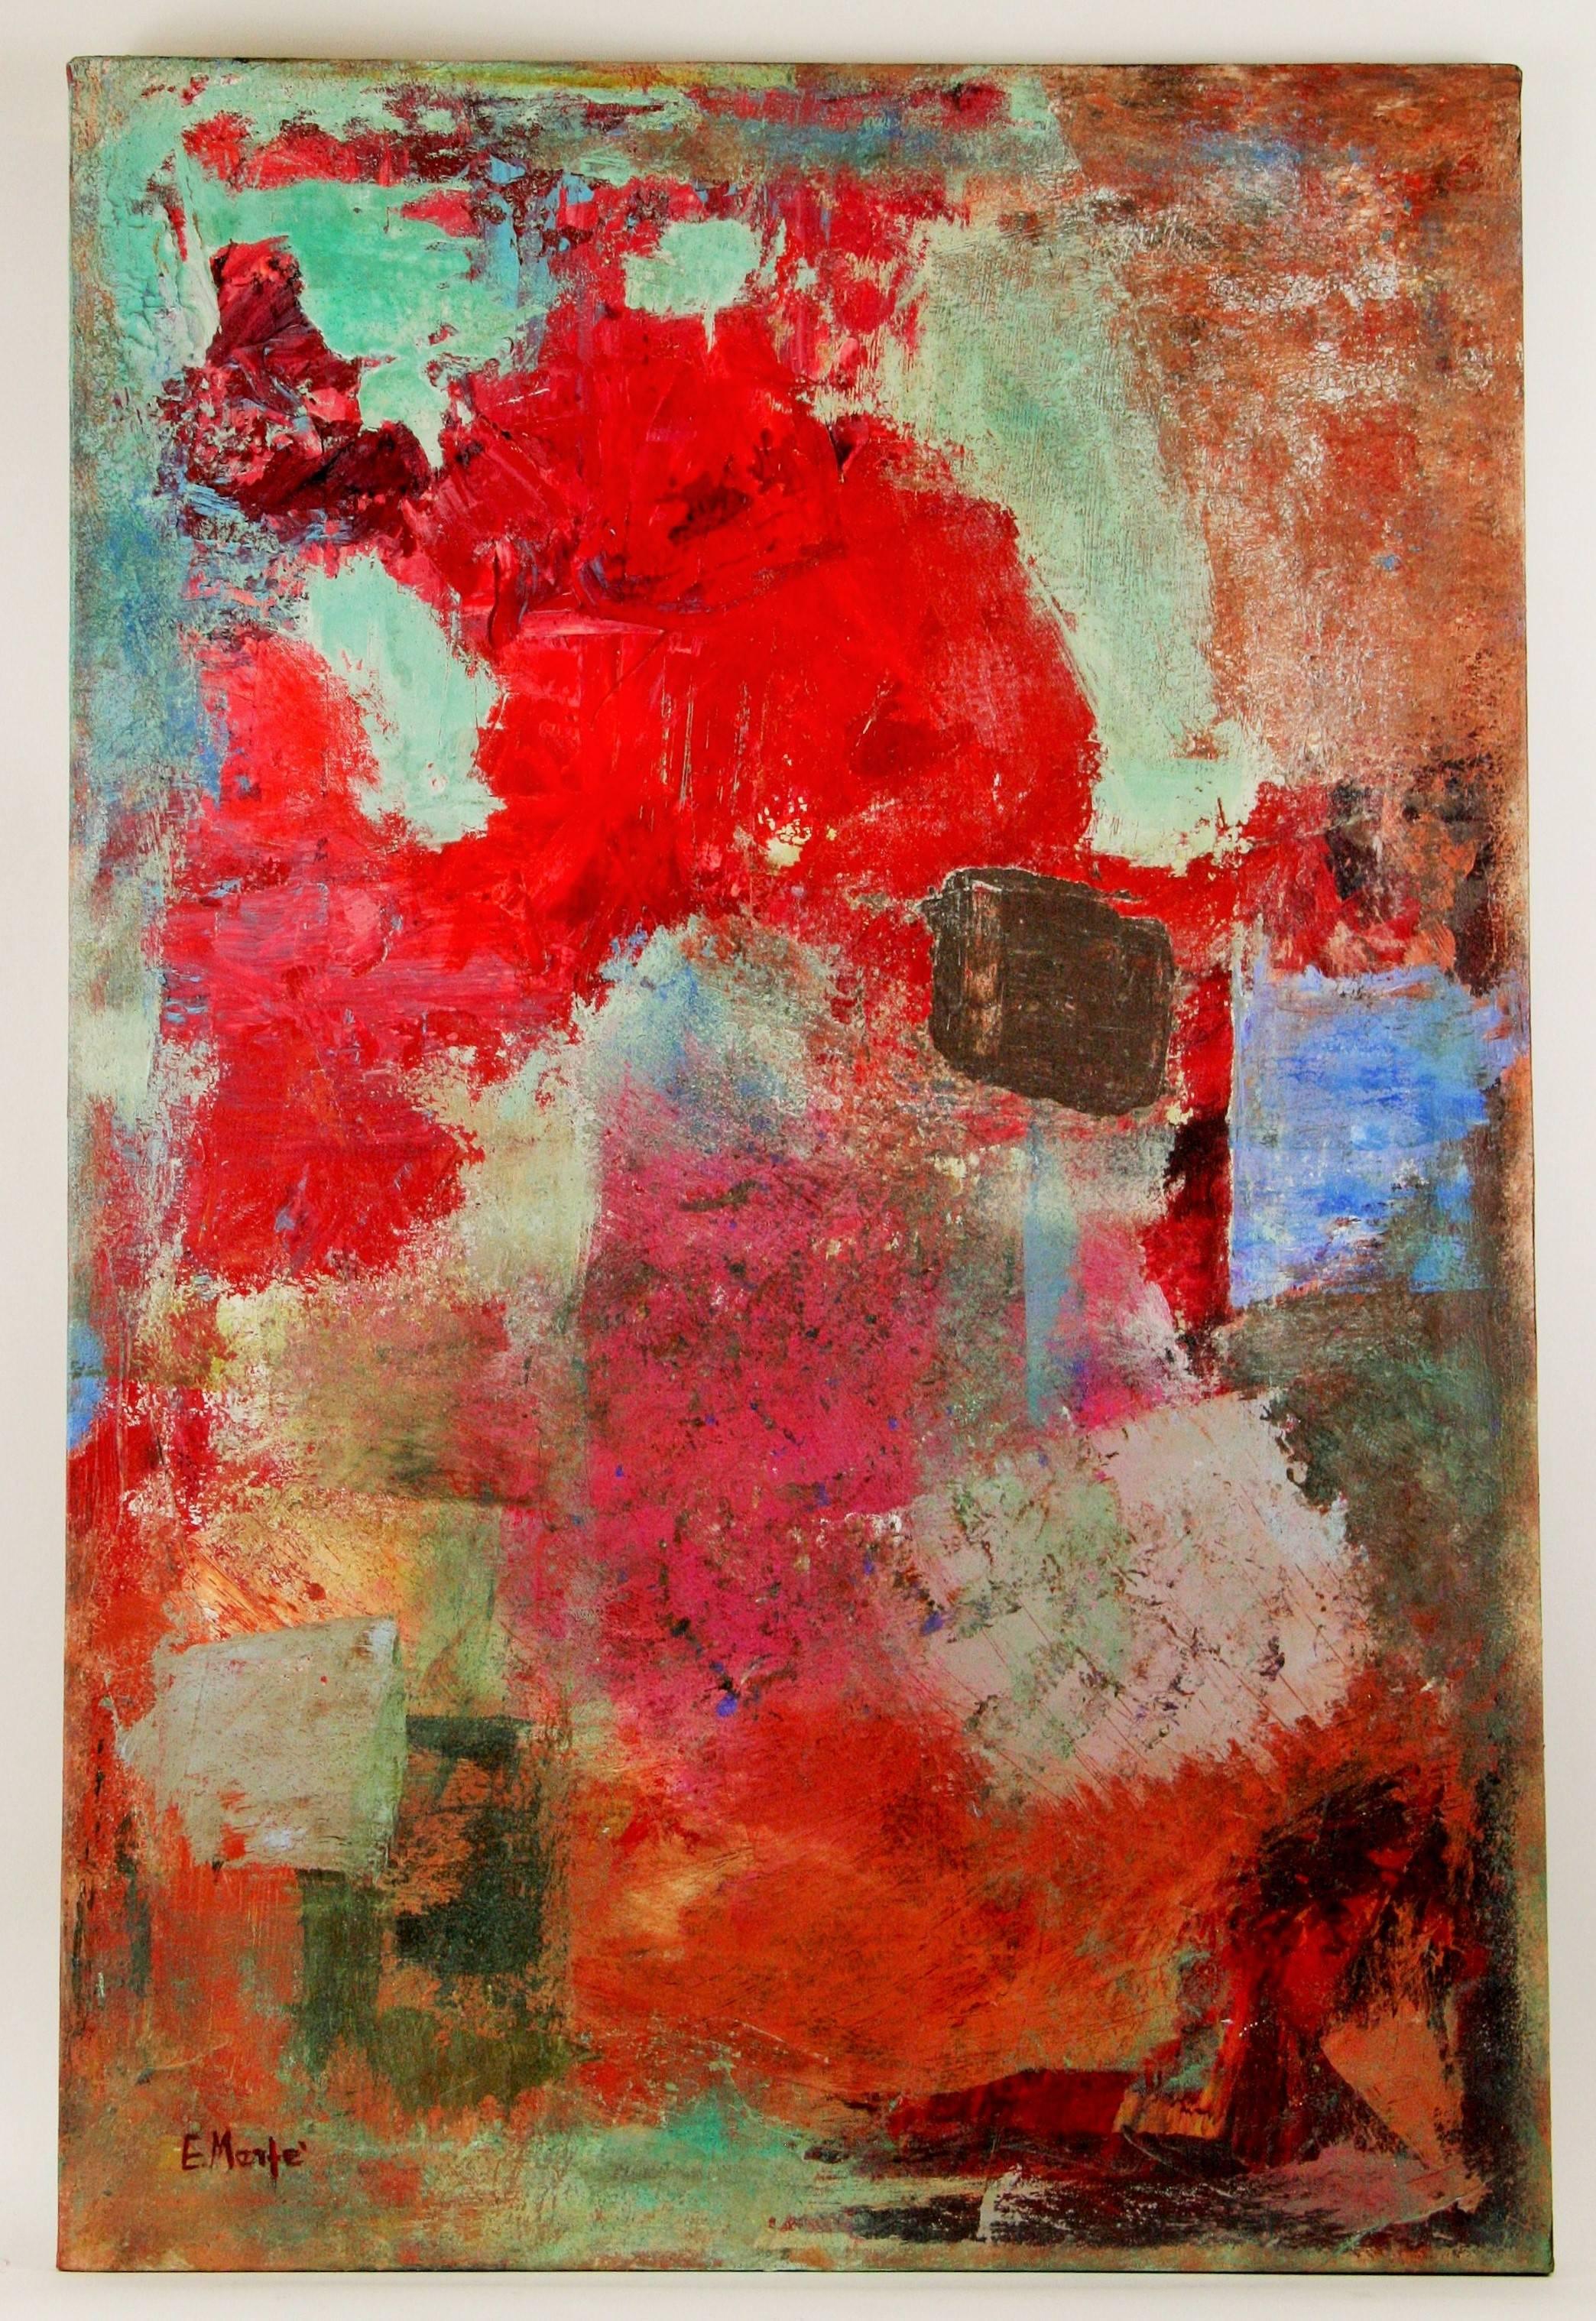 E.Marfe Abstract Painting - Large Abstract Seeking Center  by Marfe